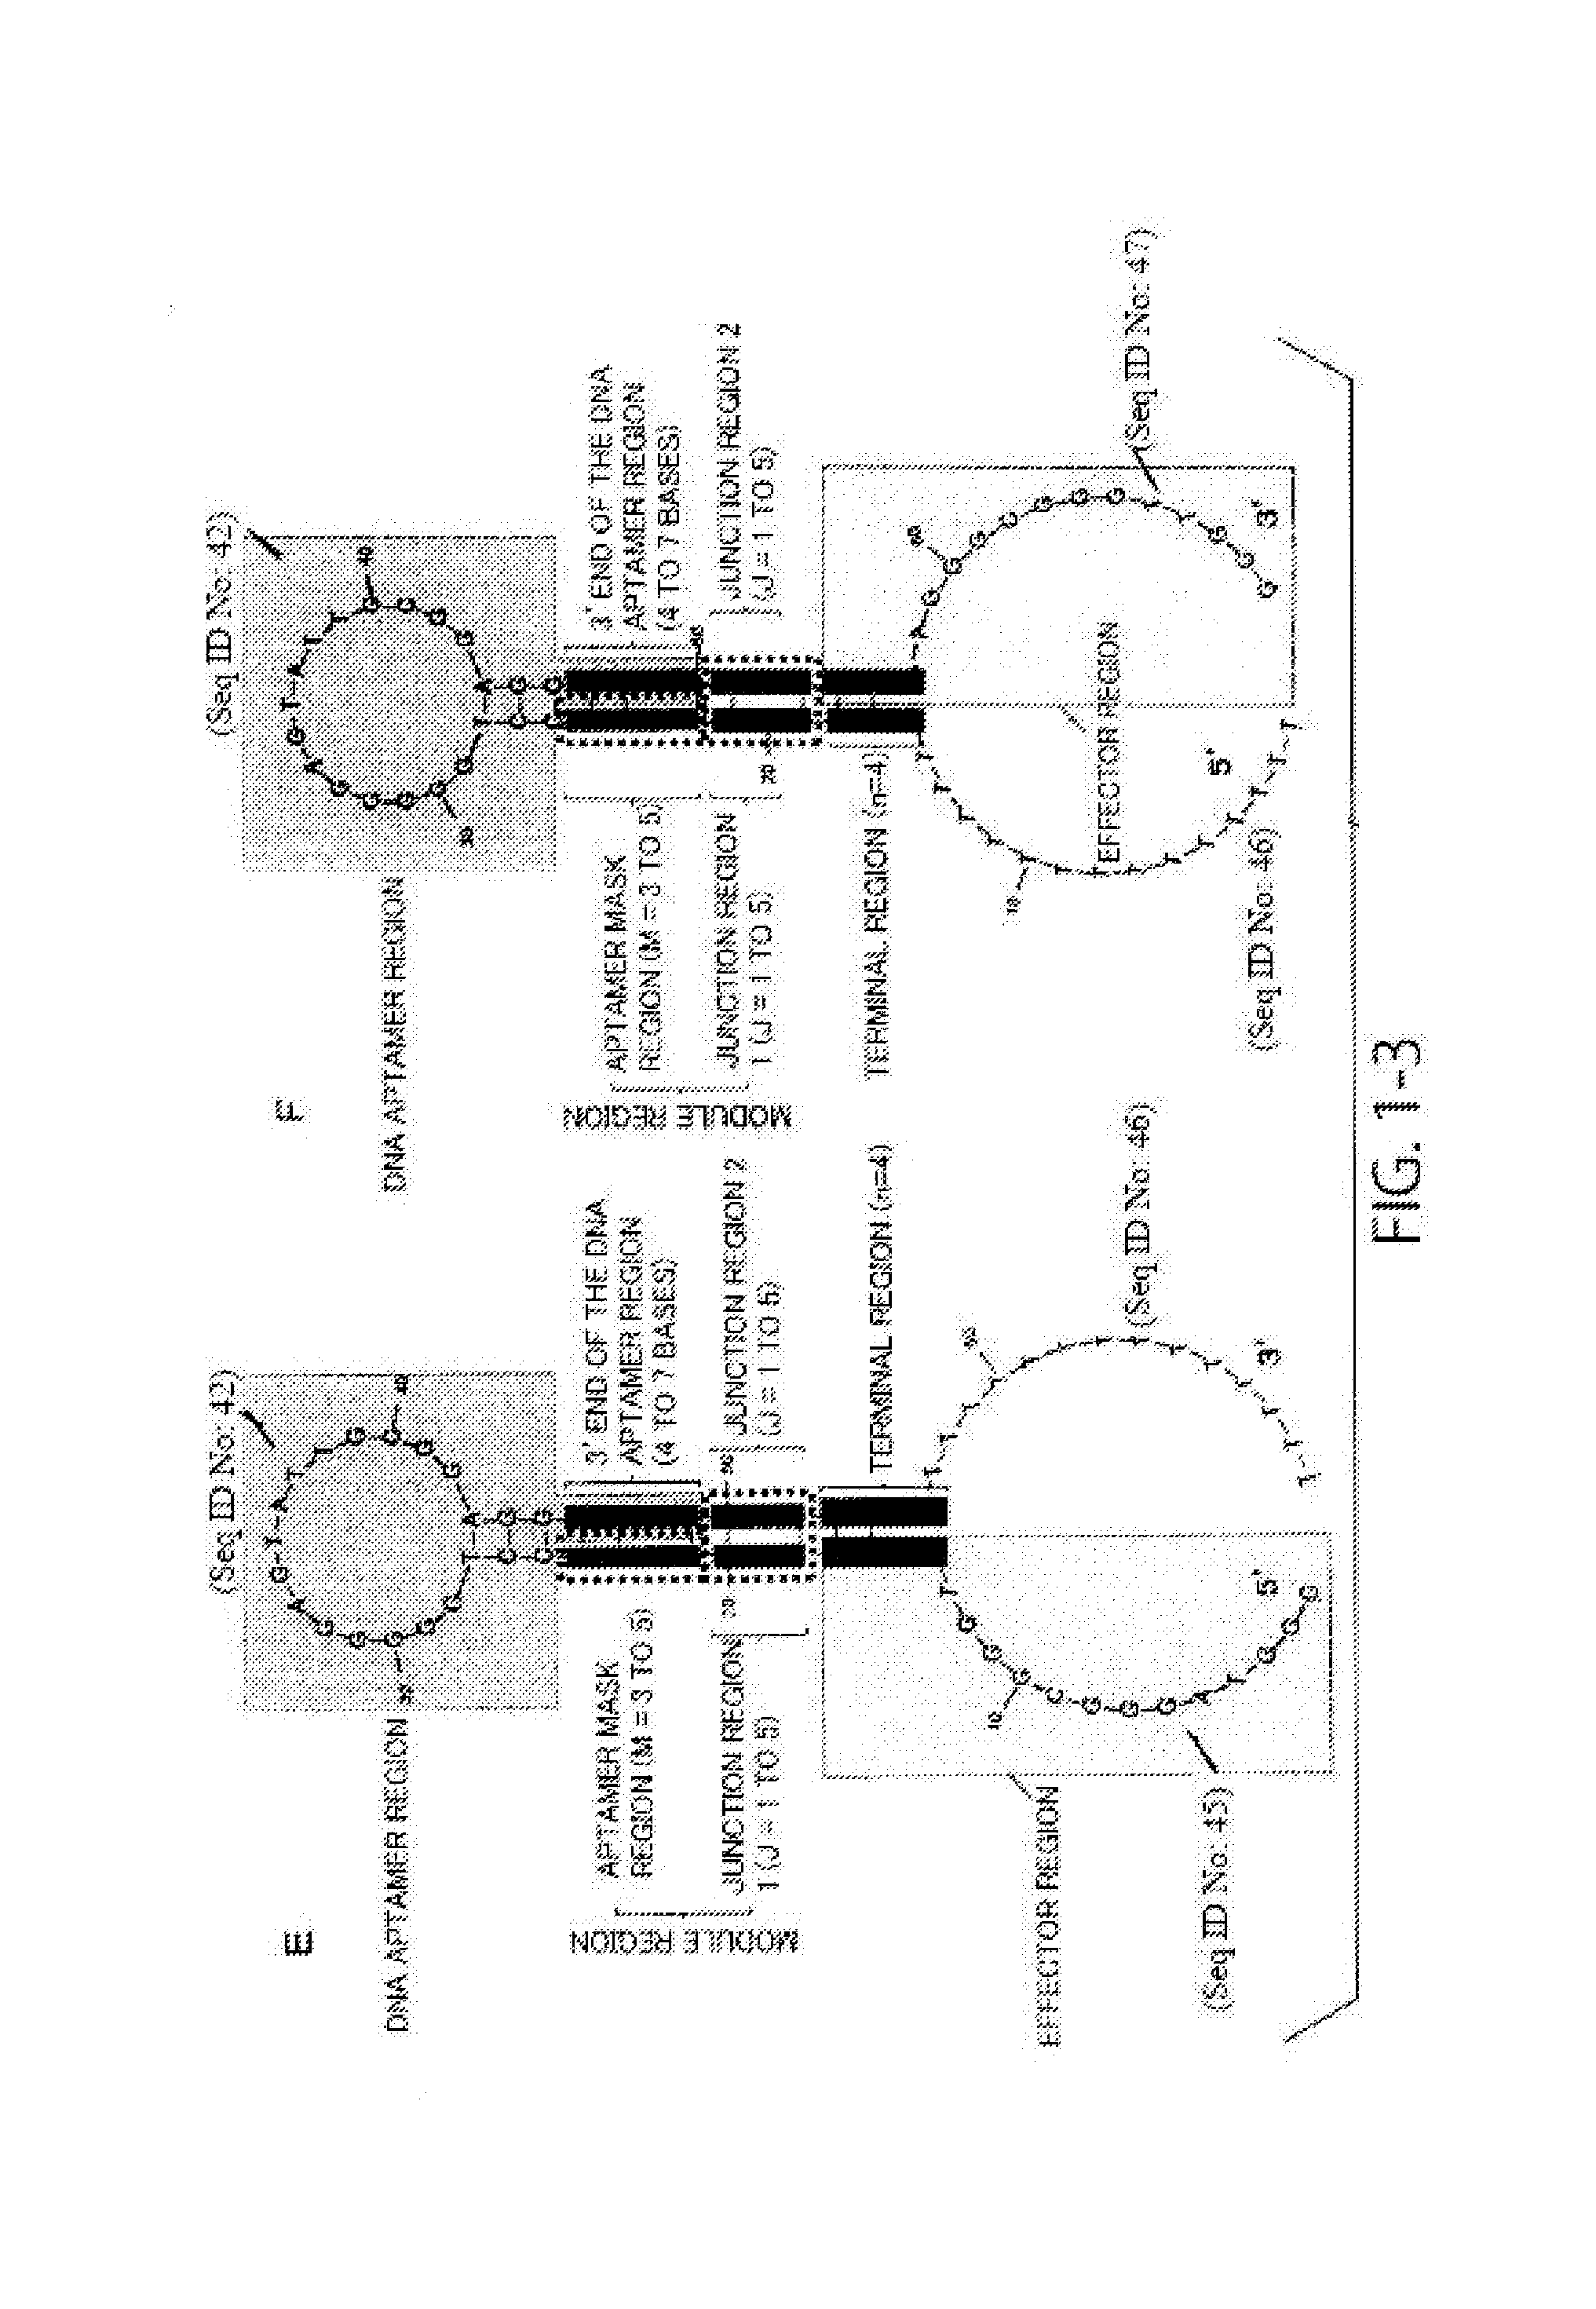 Nucleic acid molecules for highly sensitive detection of ligands, screening method for nucleic acid molecules, and optimization method for sensitivity of nucleic acid molecules